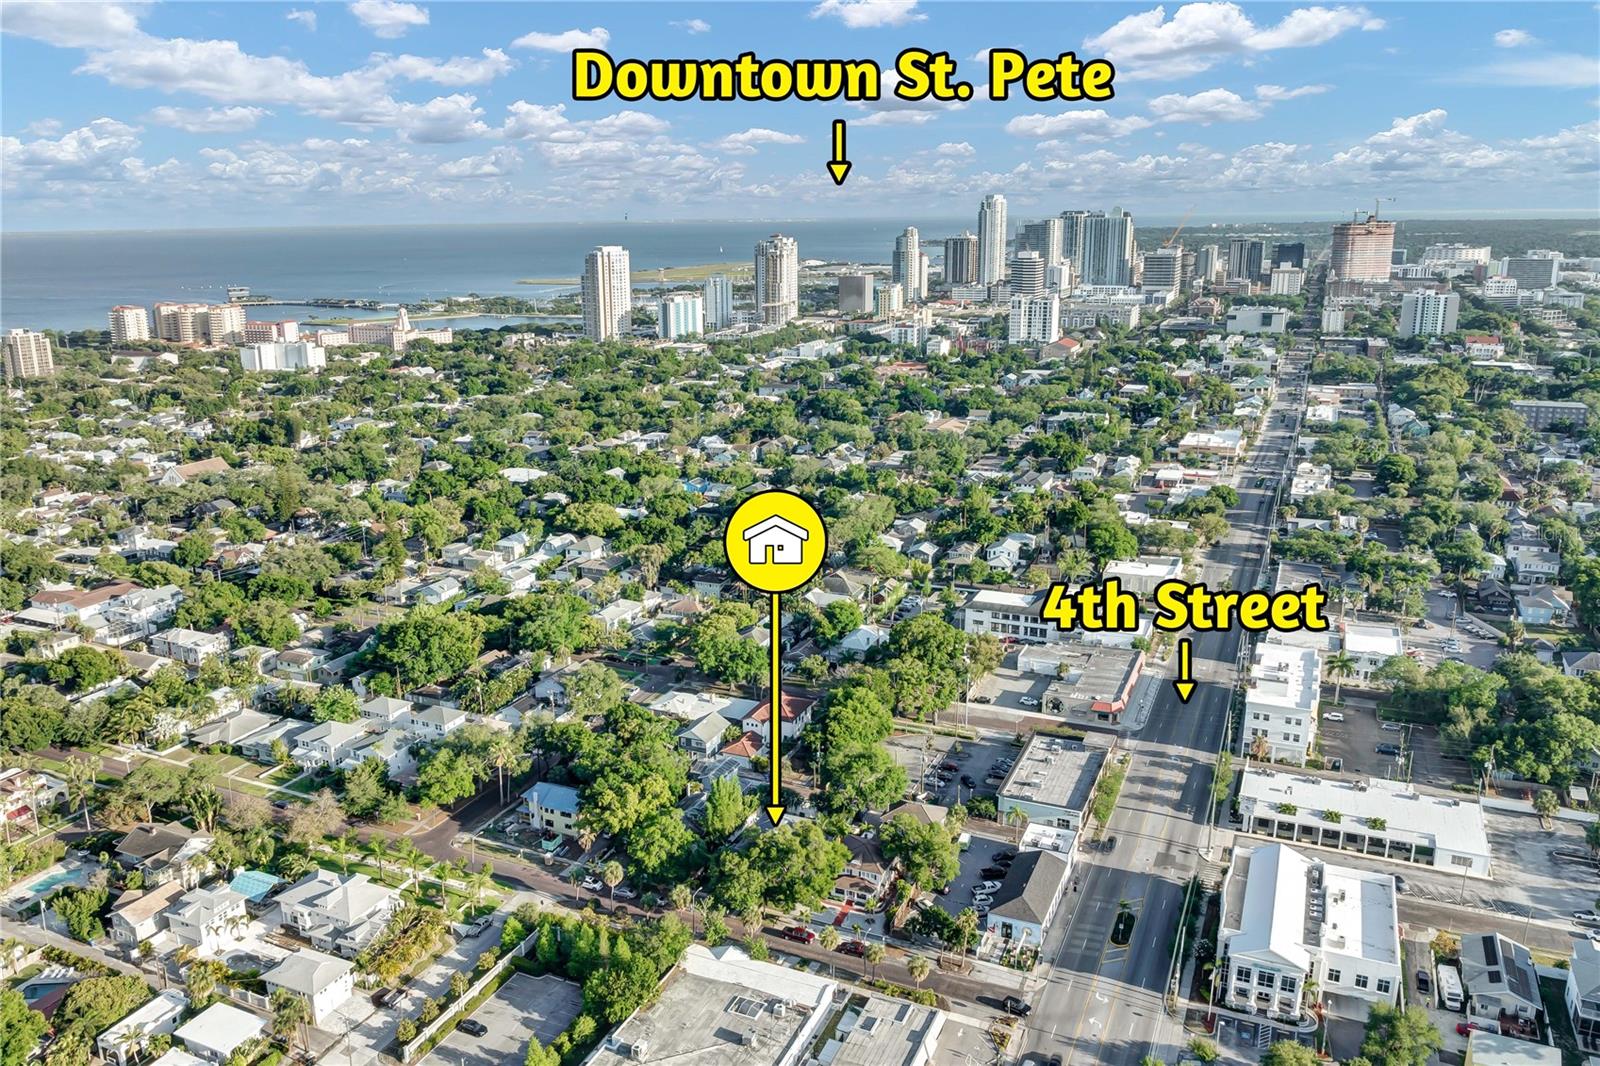 Close proximity to Downtown and Tampa Bay